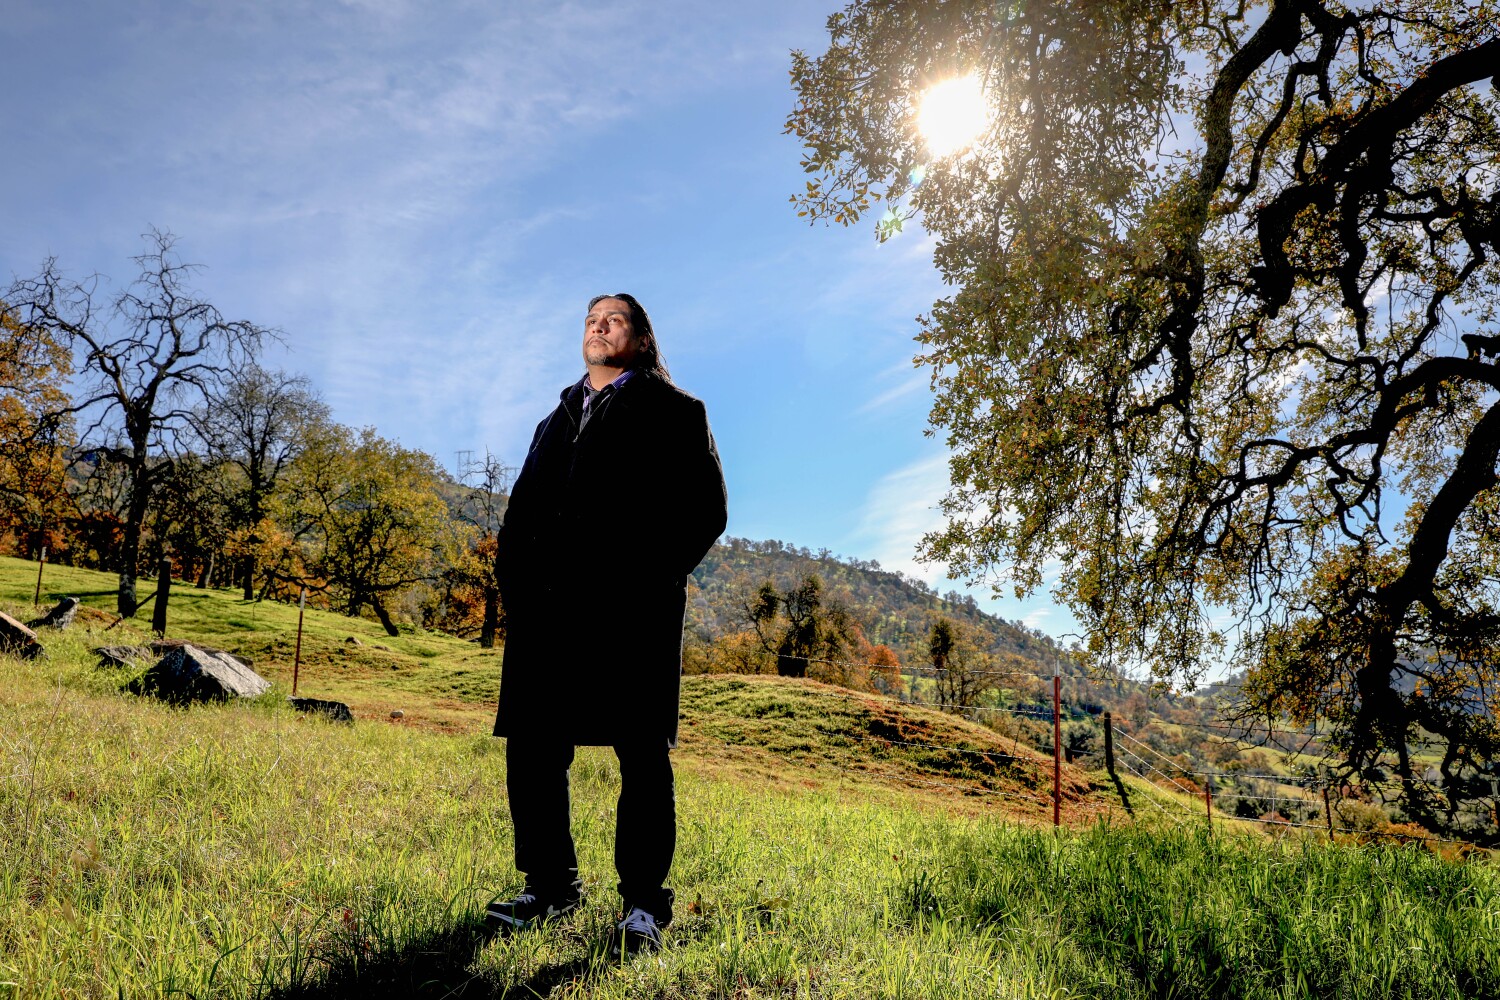 Native Americans want to ditch the name Squaw Valley. A county supervisor says context matters